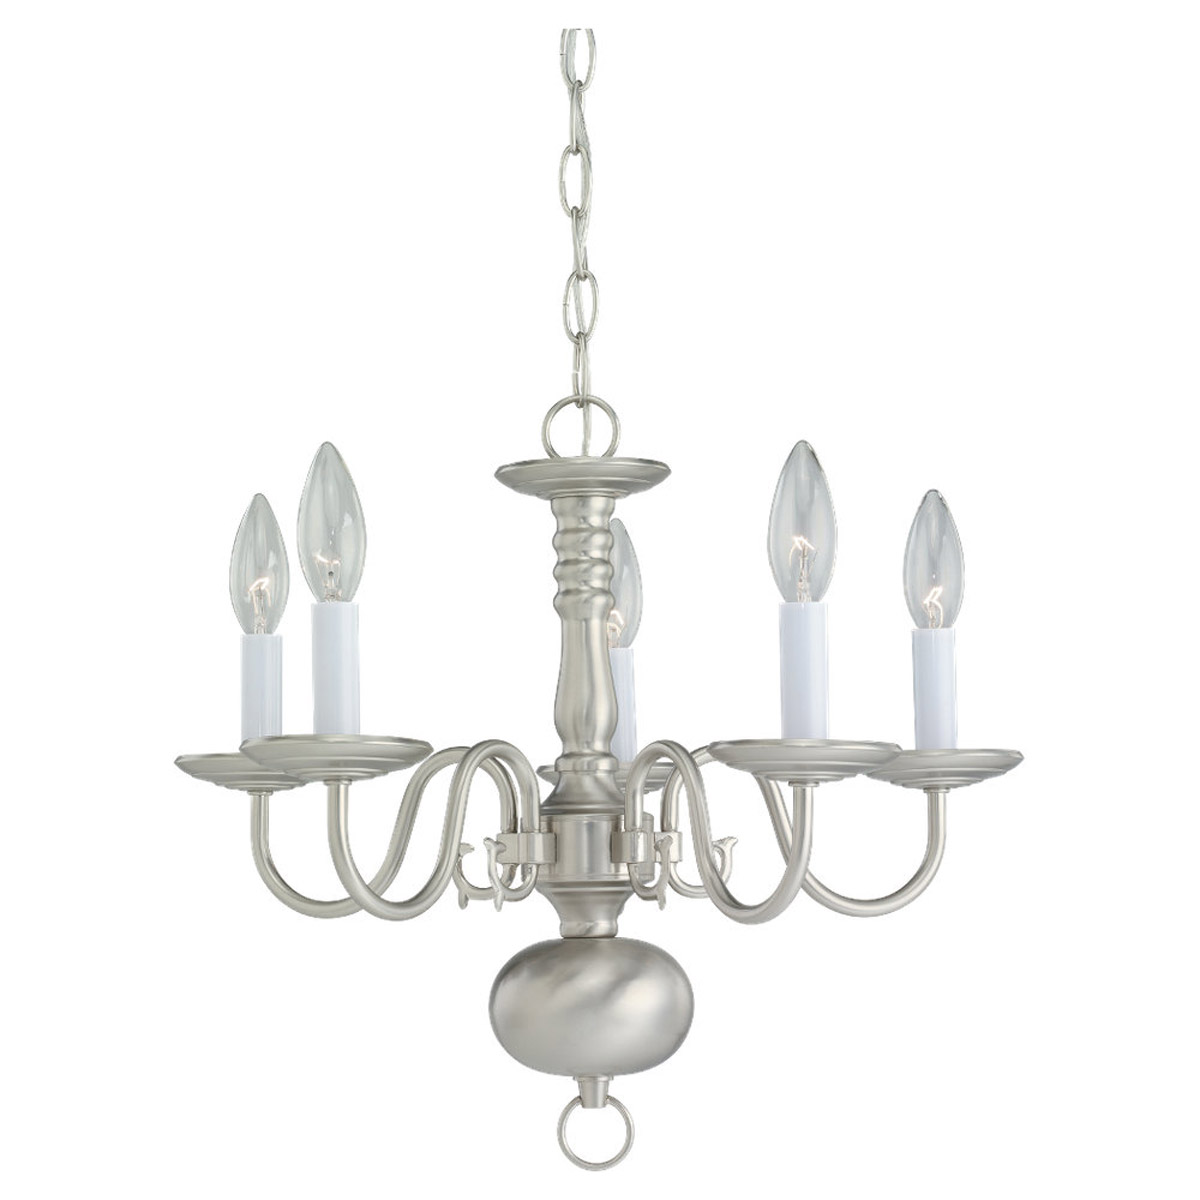 Sea Gull Lighting Traditional 5 Light Chandelier in Brushed Nickel 3409-962 photo